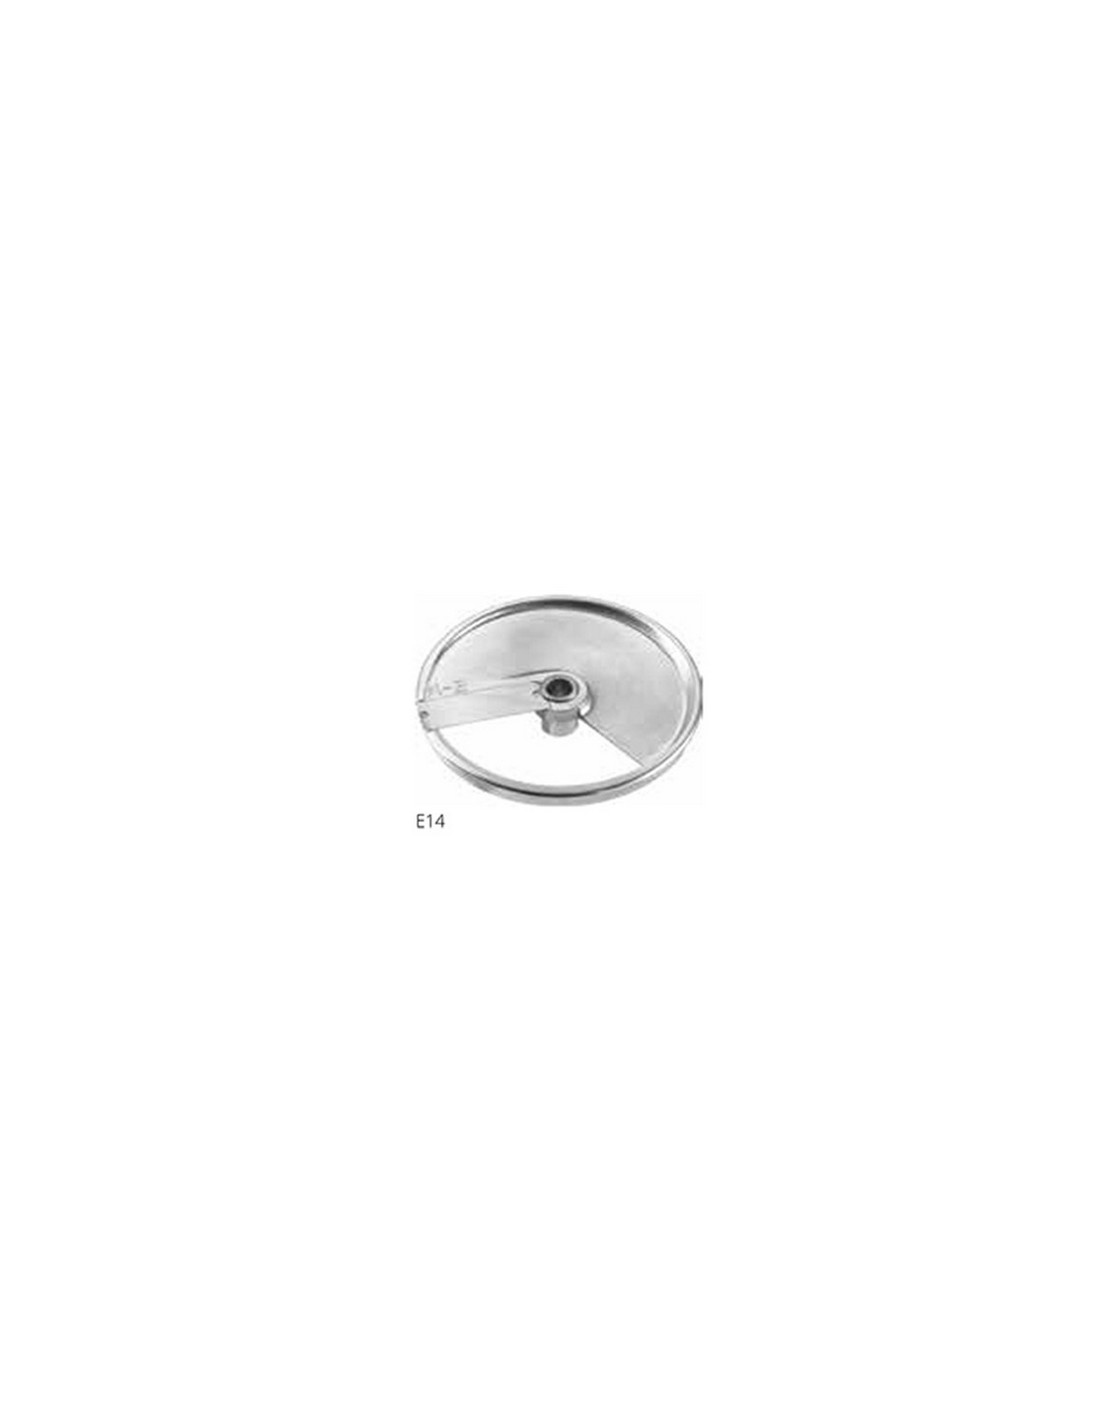 Disc for slicing potatoes and boiled carrots, aubergines, beets - thickness 14 mm